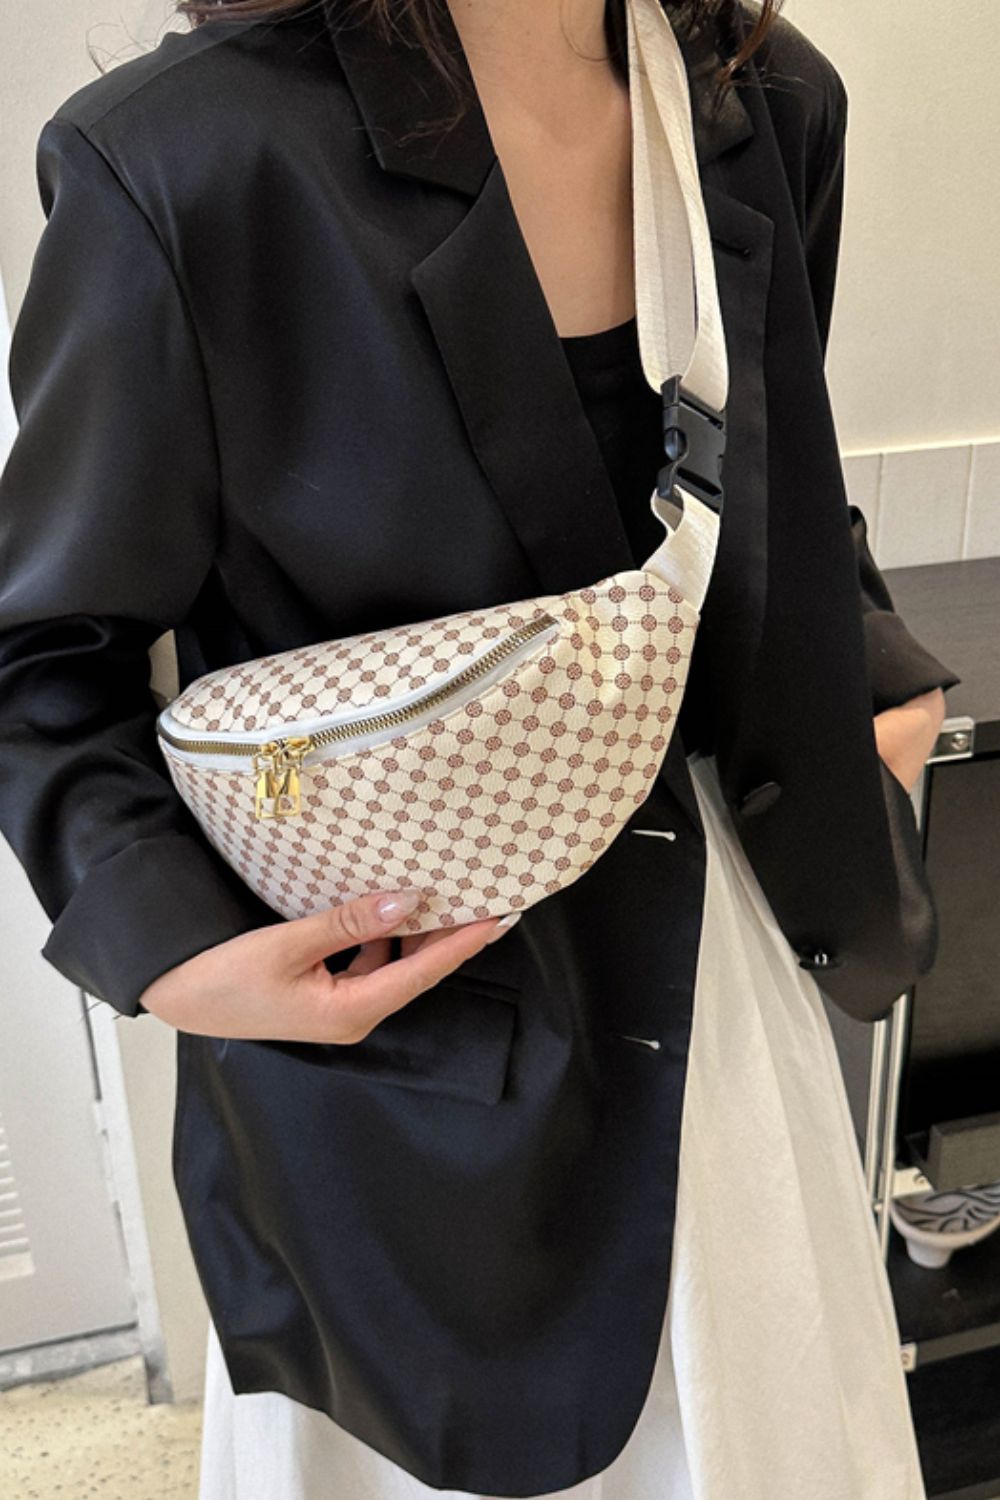 Simply Chic Boutique - A fun way to wear the Louis Vuitton Damier